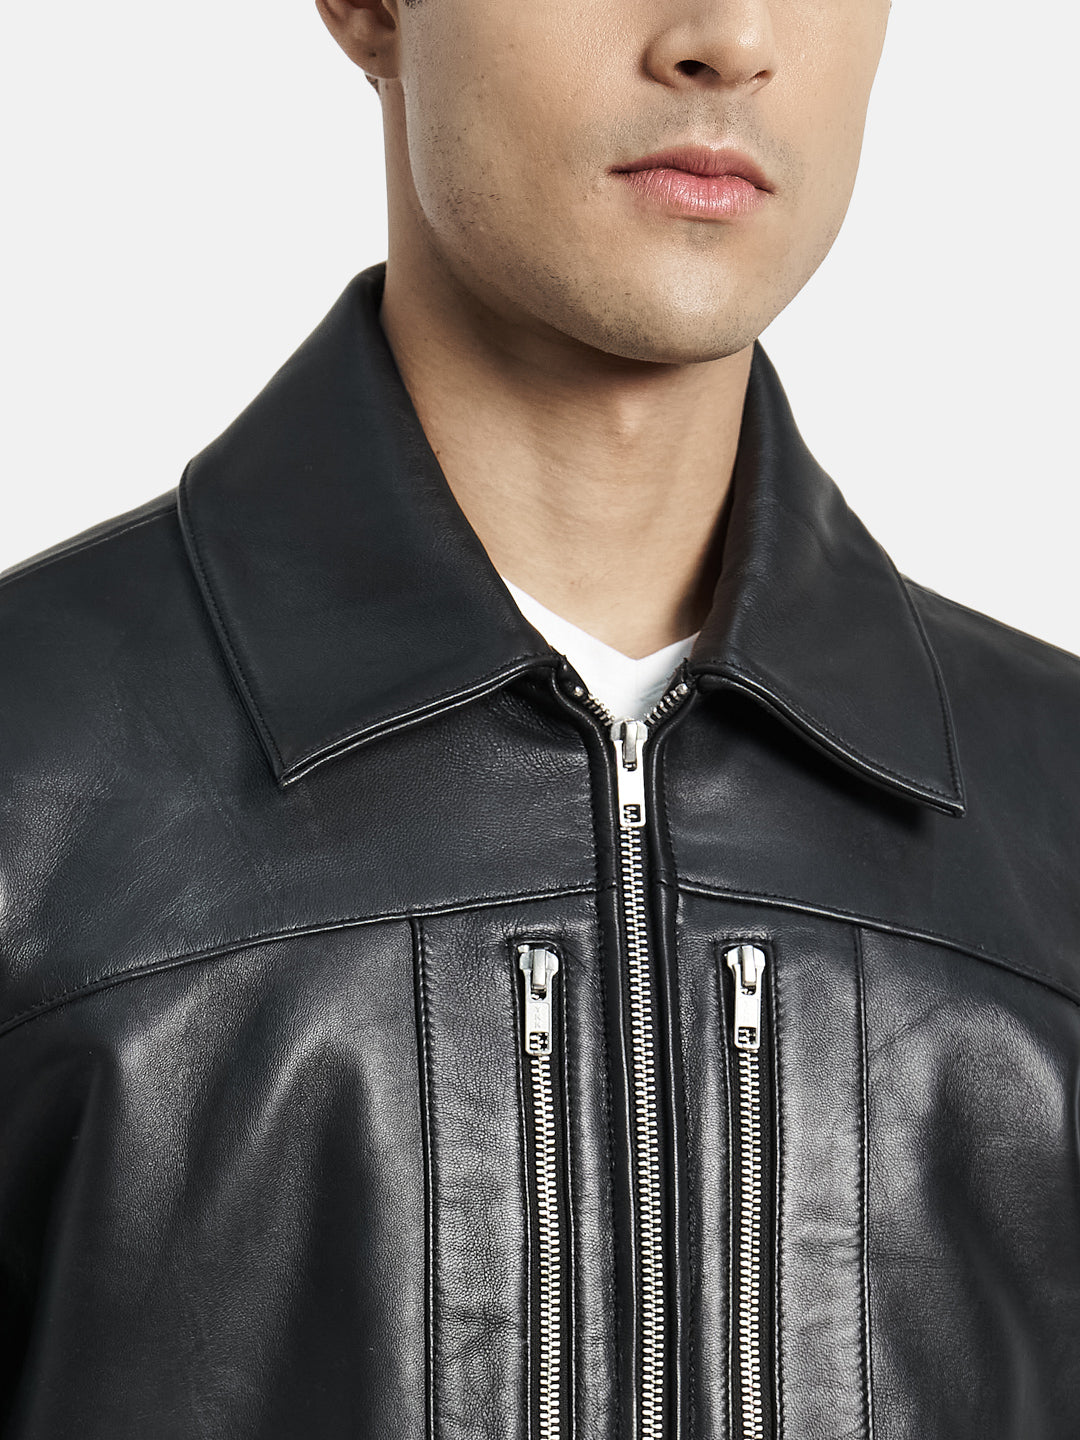 Relaxed Fit Thick Black Leather Jacket